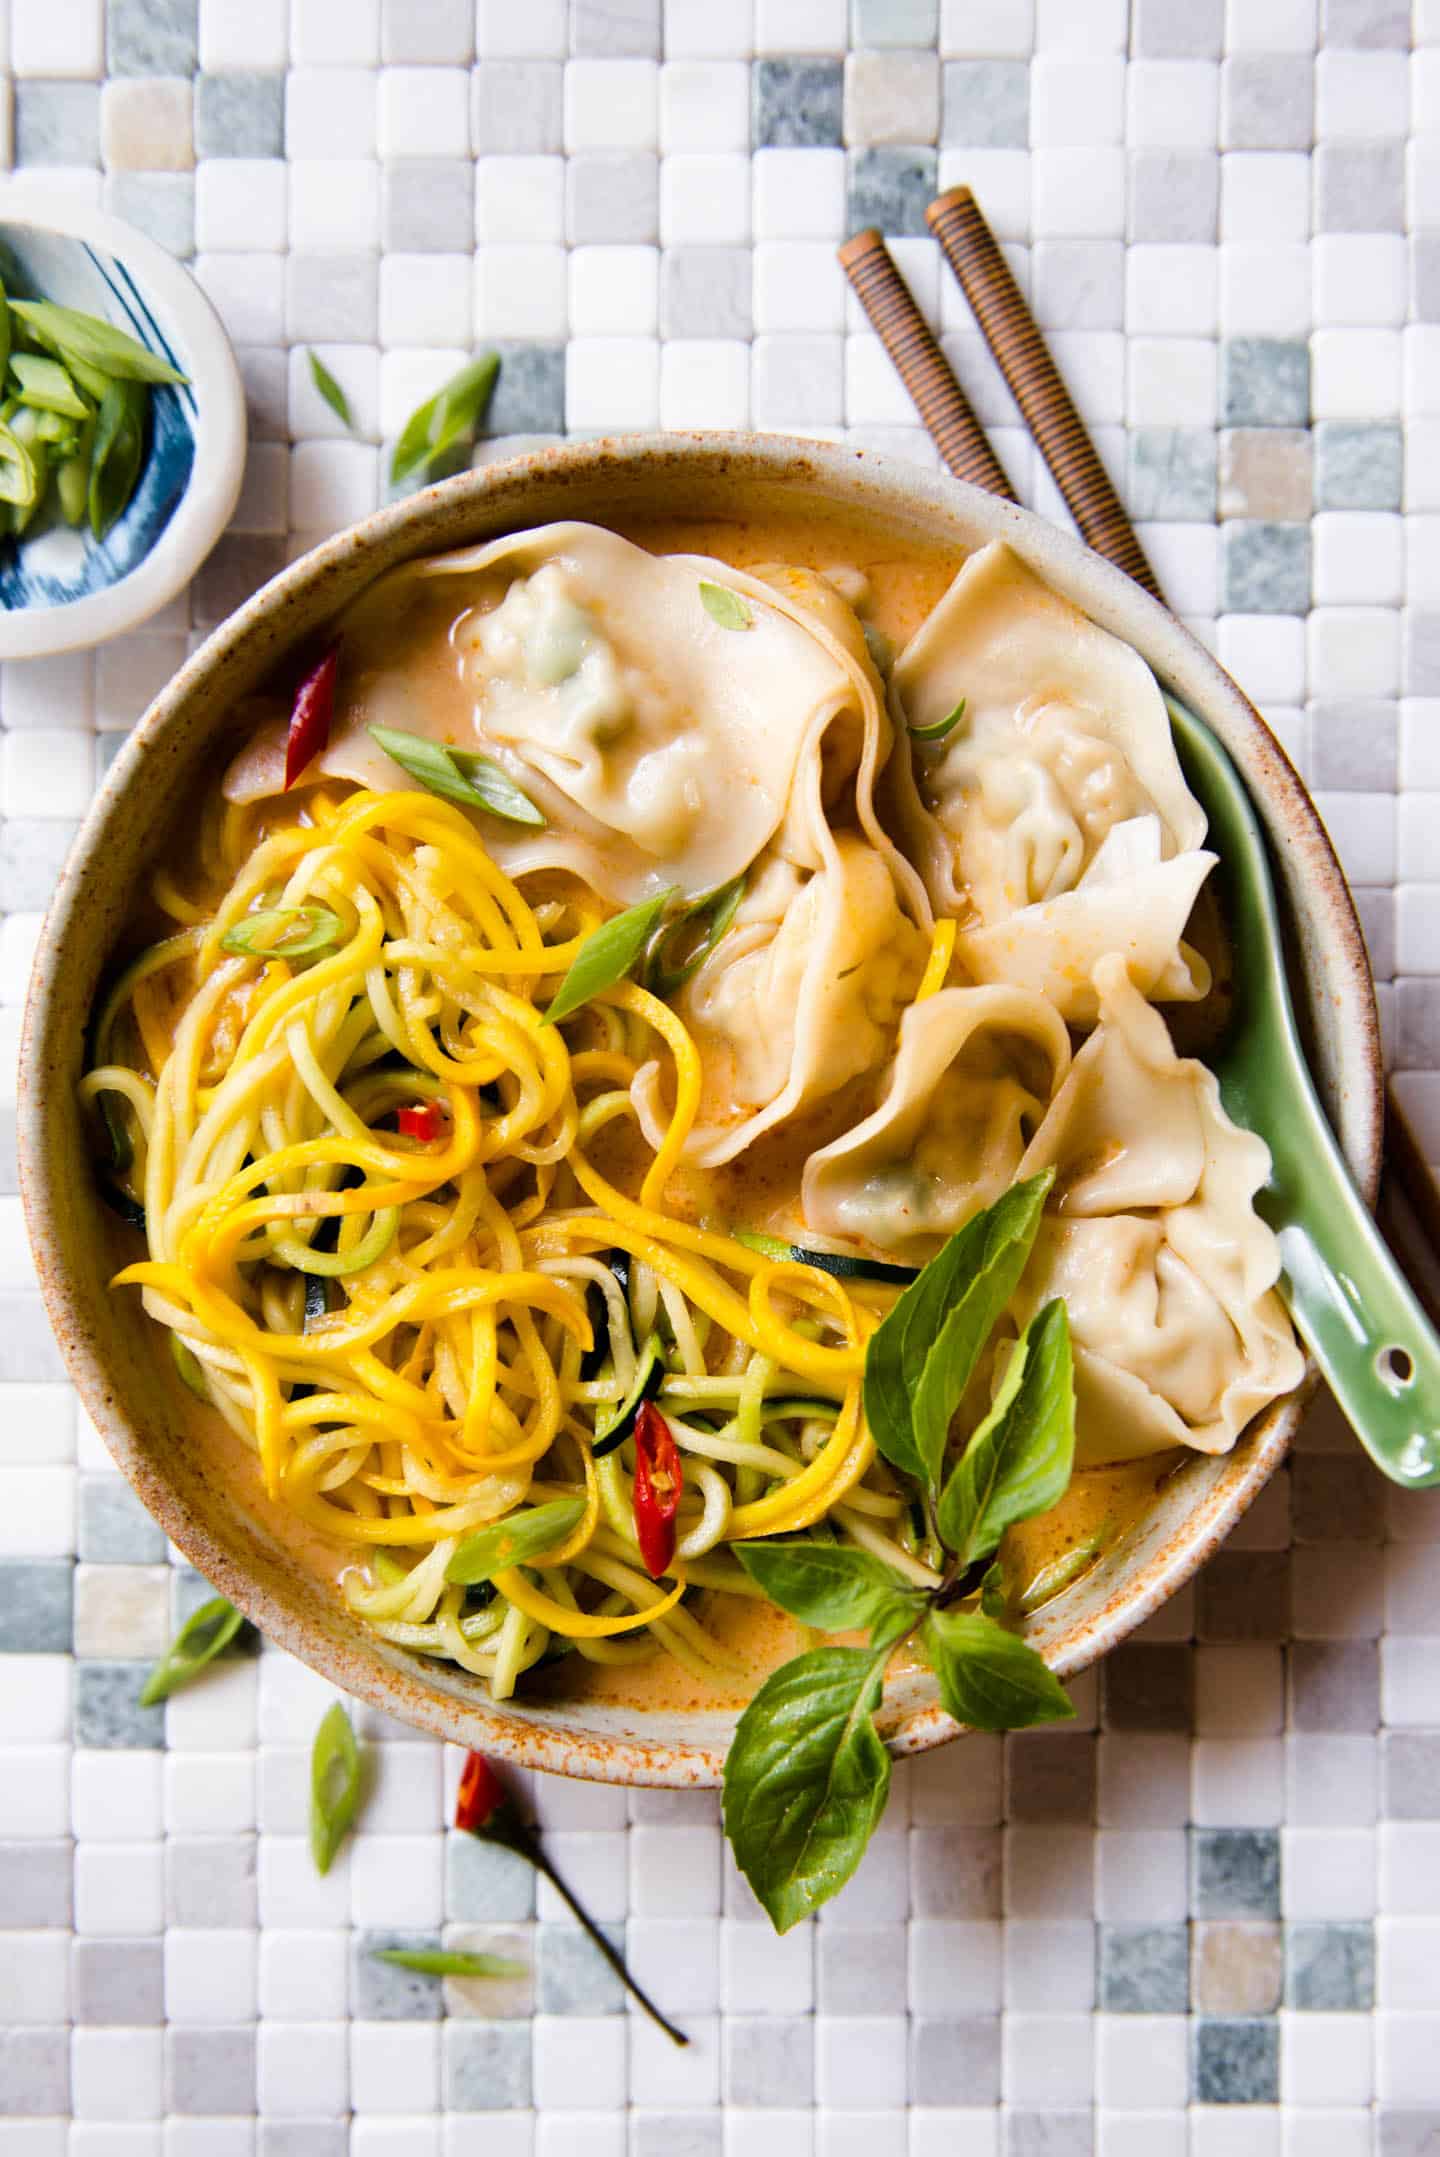 Red Curry Wonton Soup Recipe with Zucchini Noodles